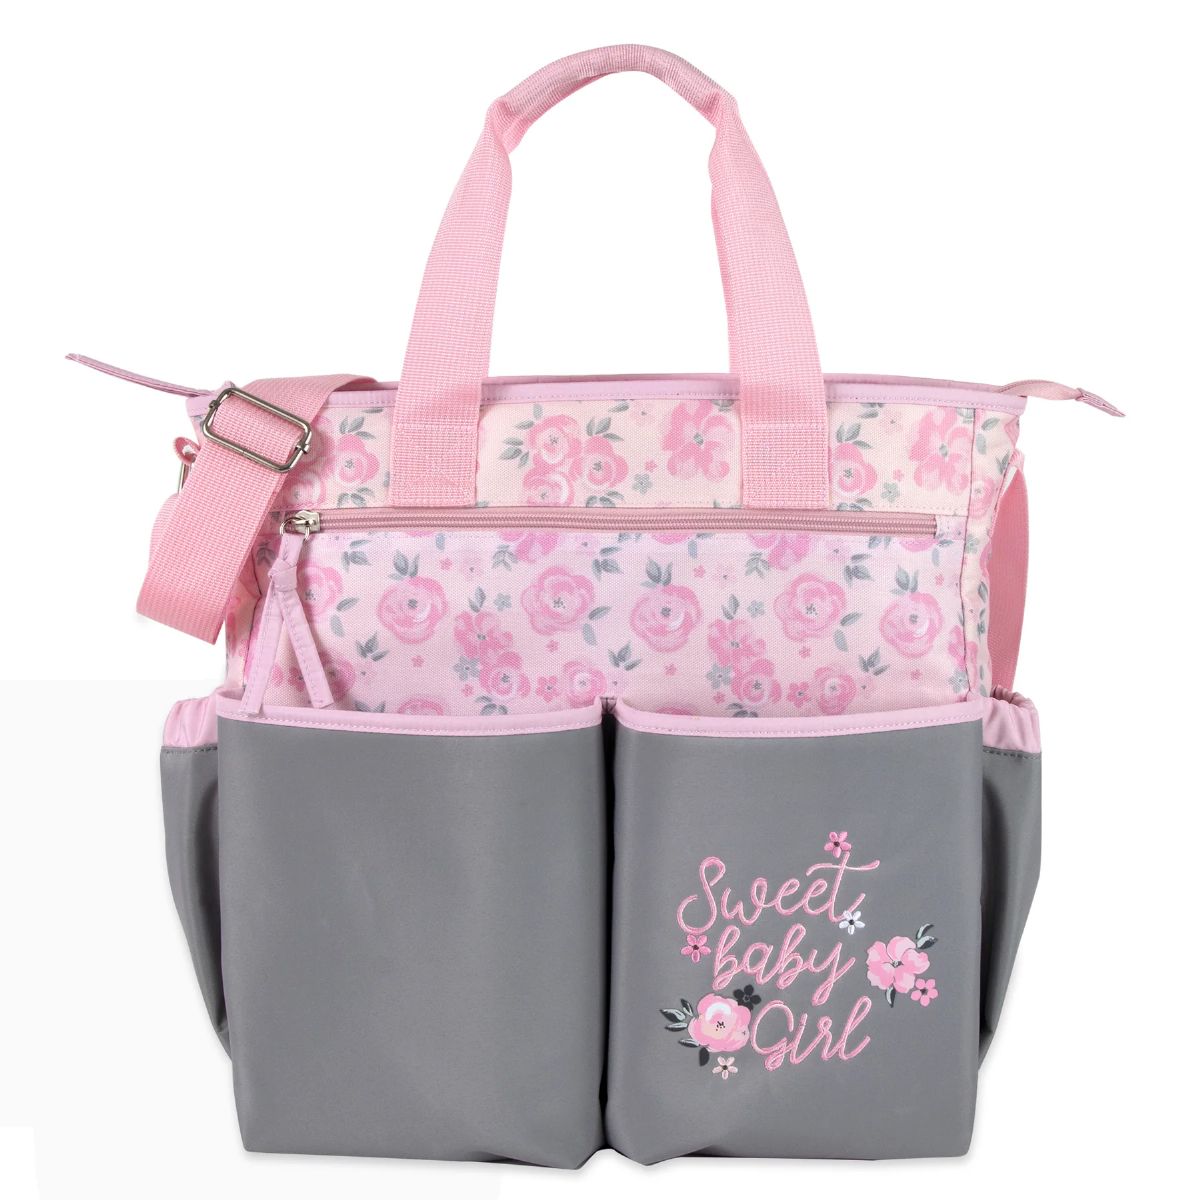 12 Pieces of Baby Essentials 3 In 1 Pink Baby Girl Themed Diaper Bag